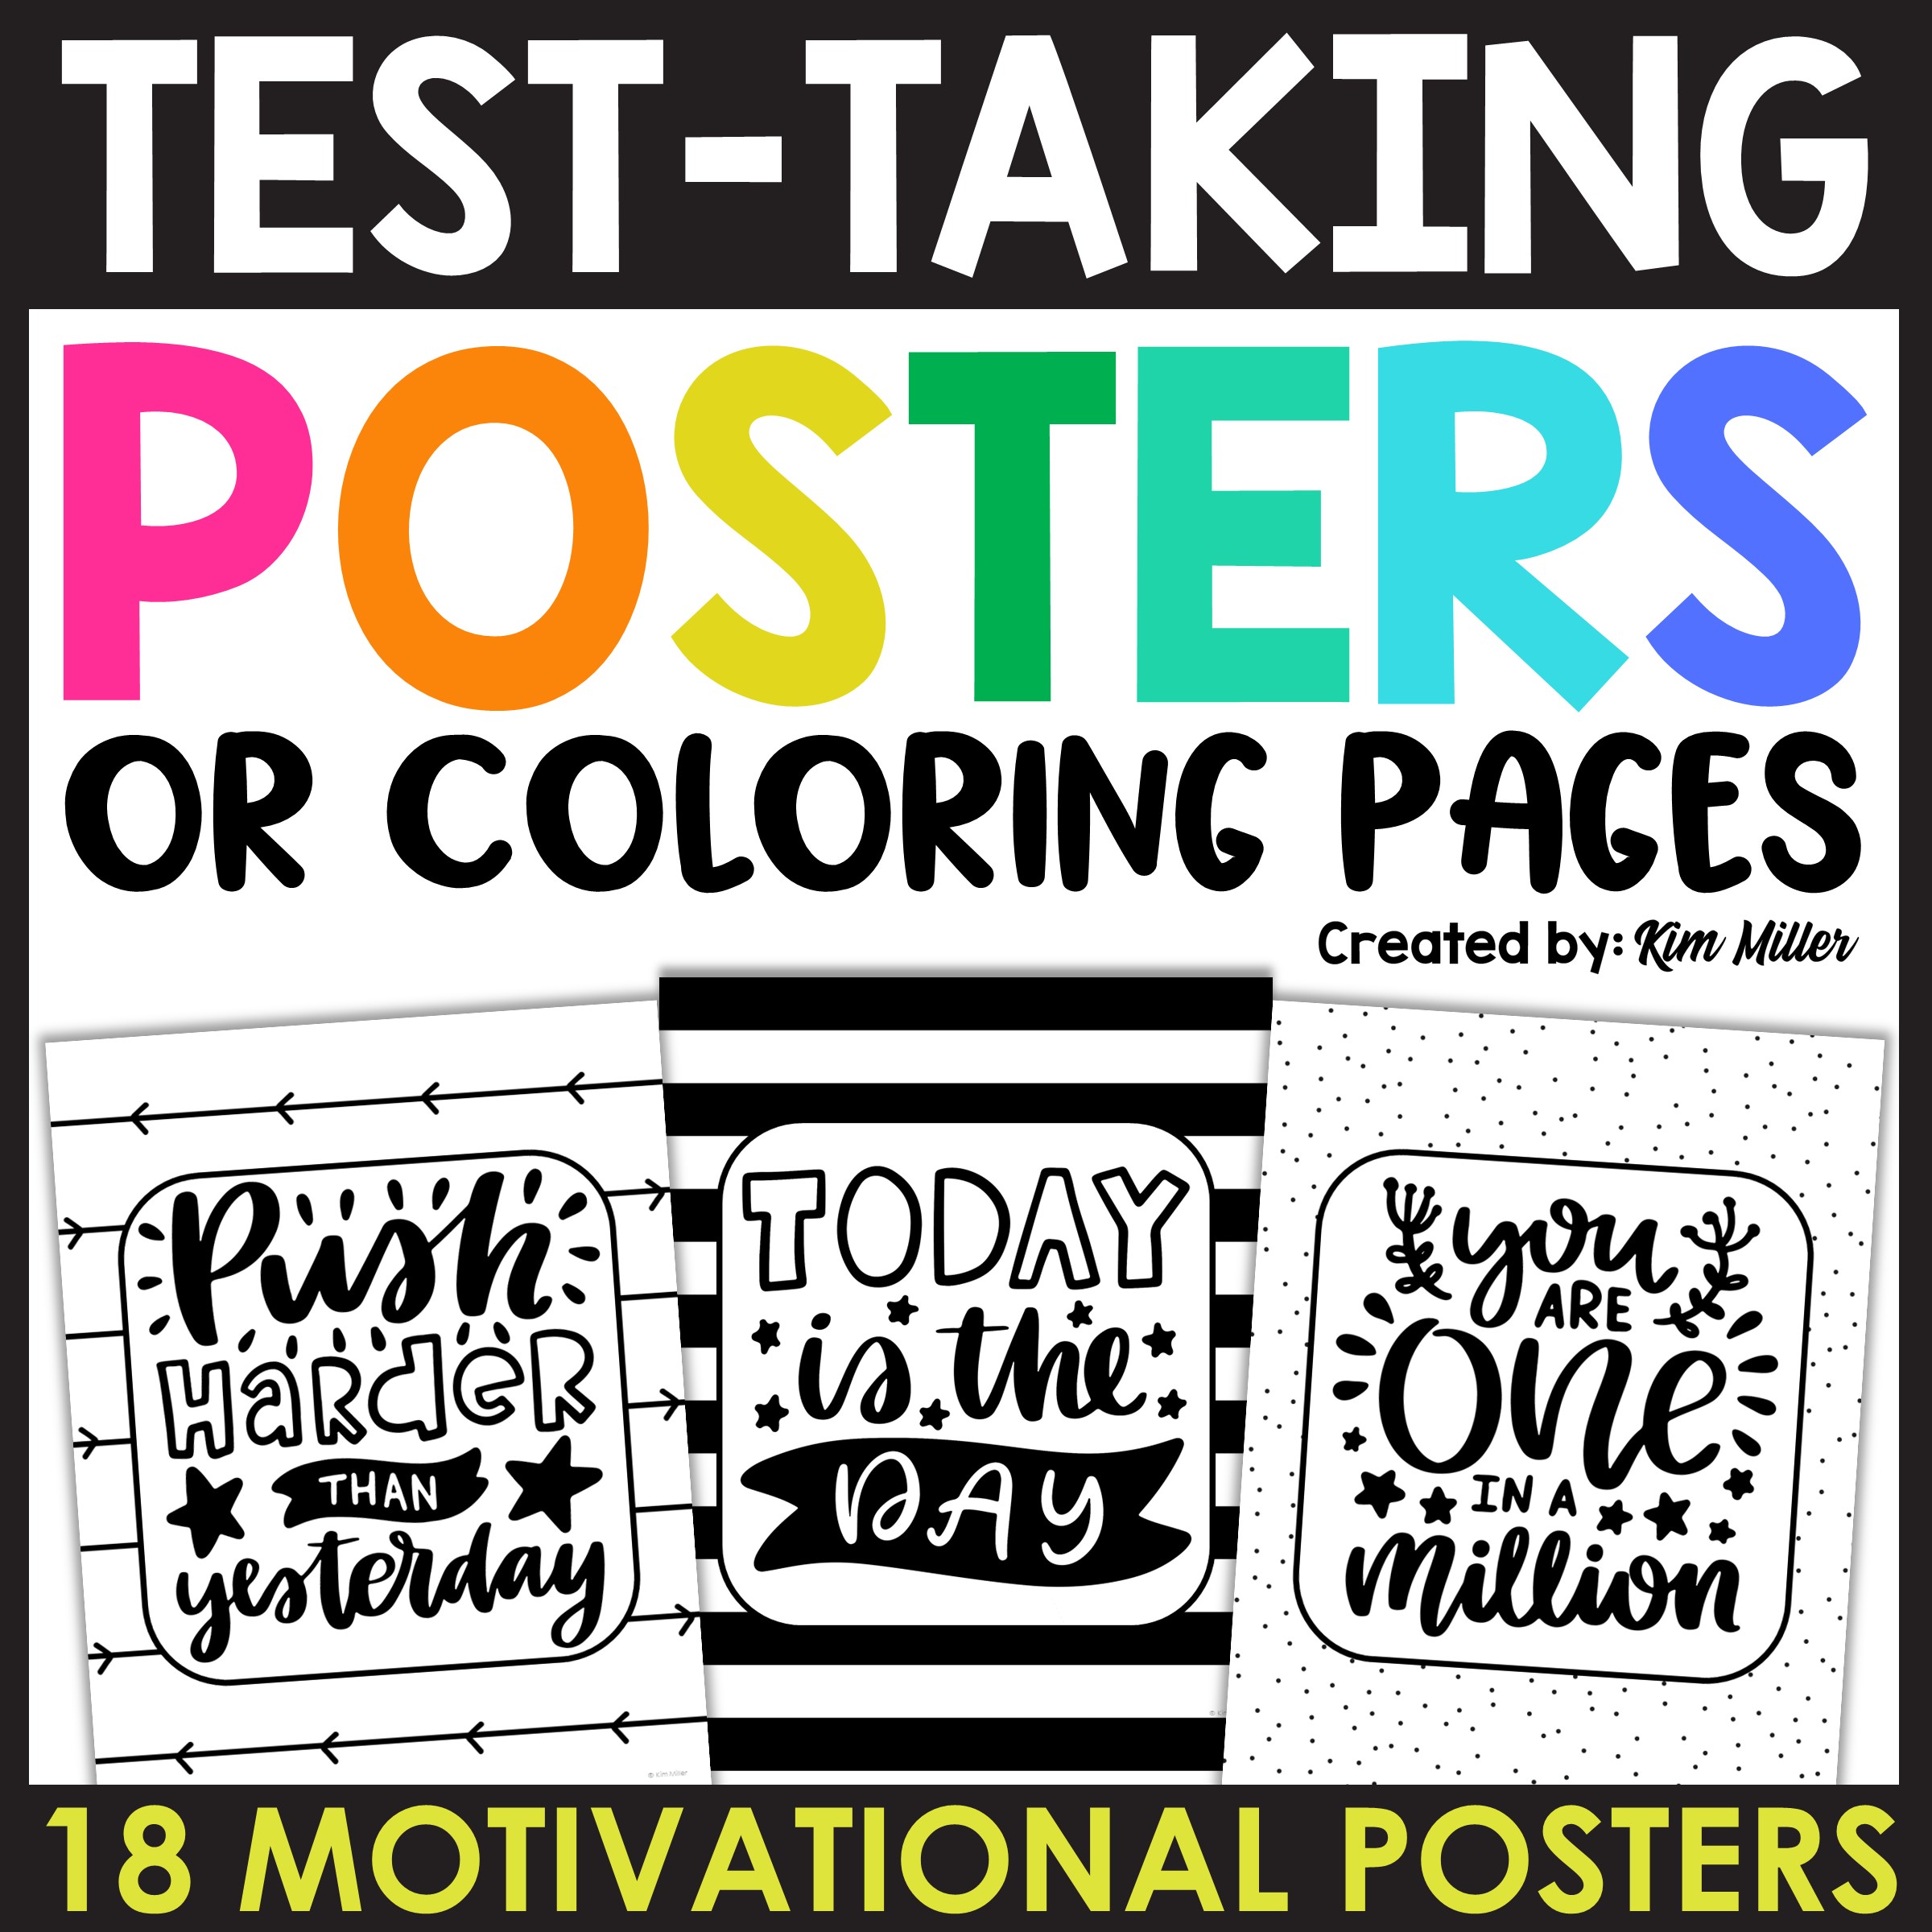 Motivational posters coloring pages for testing state testing encouragement